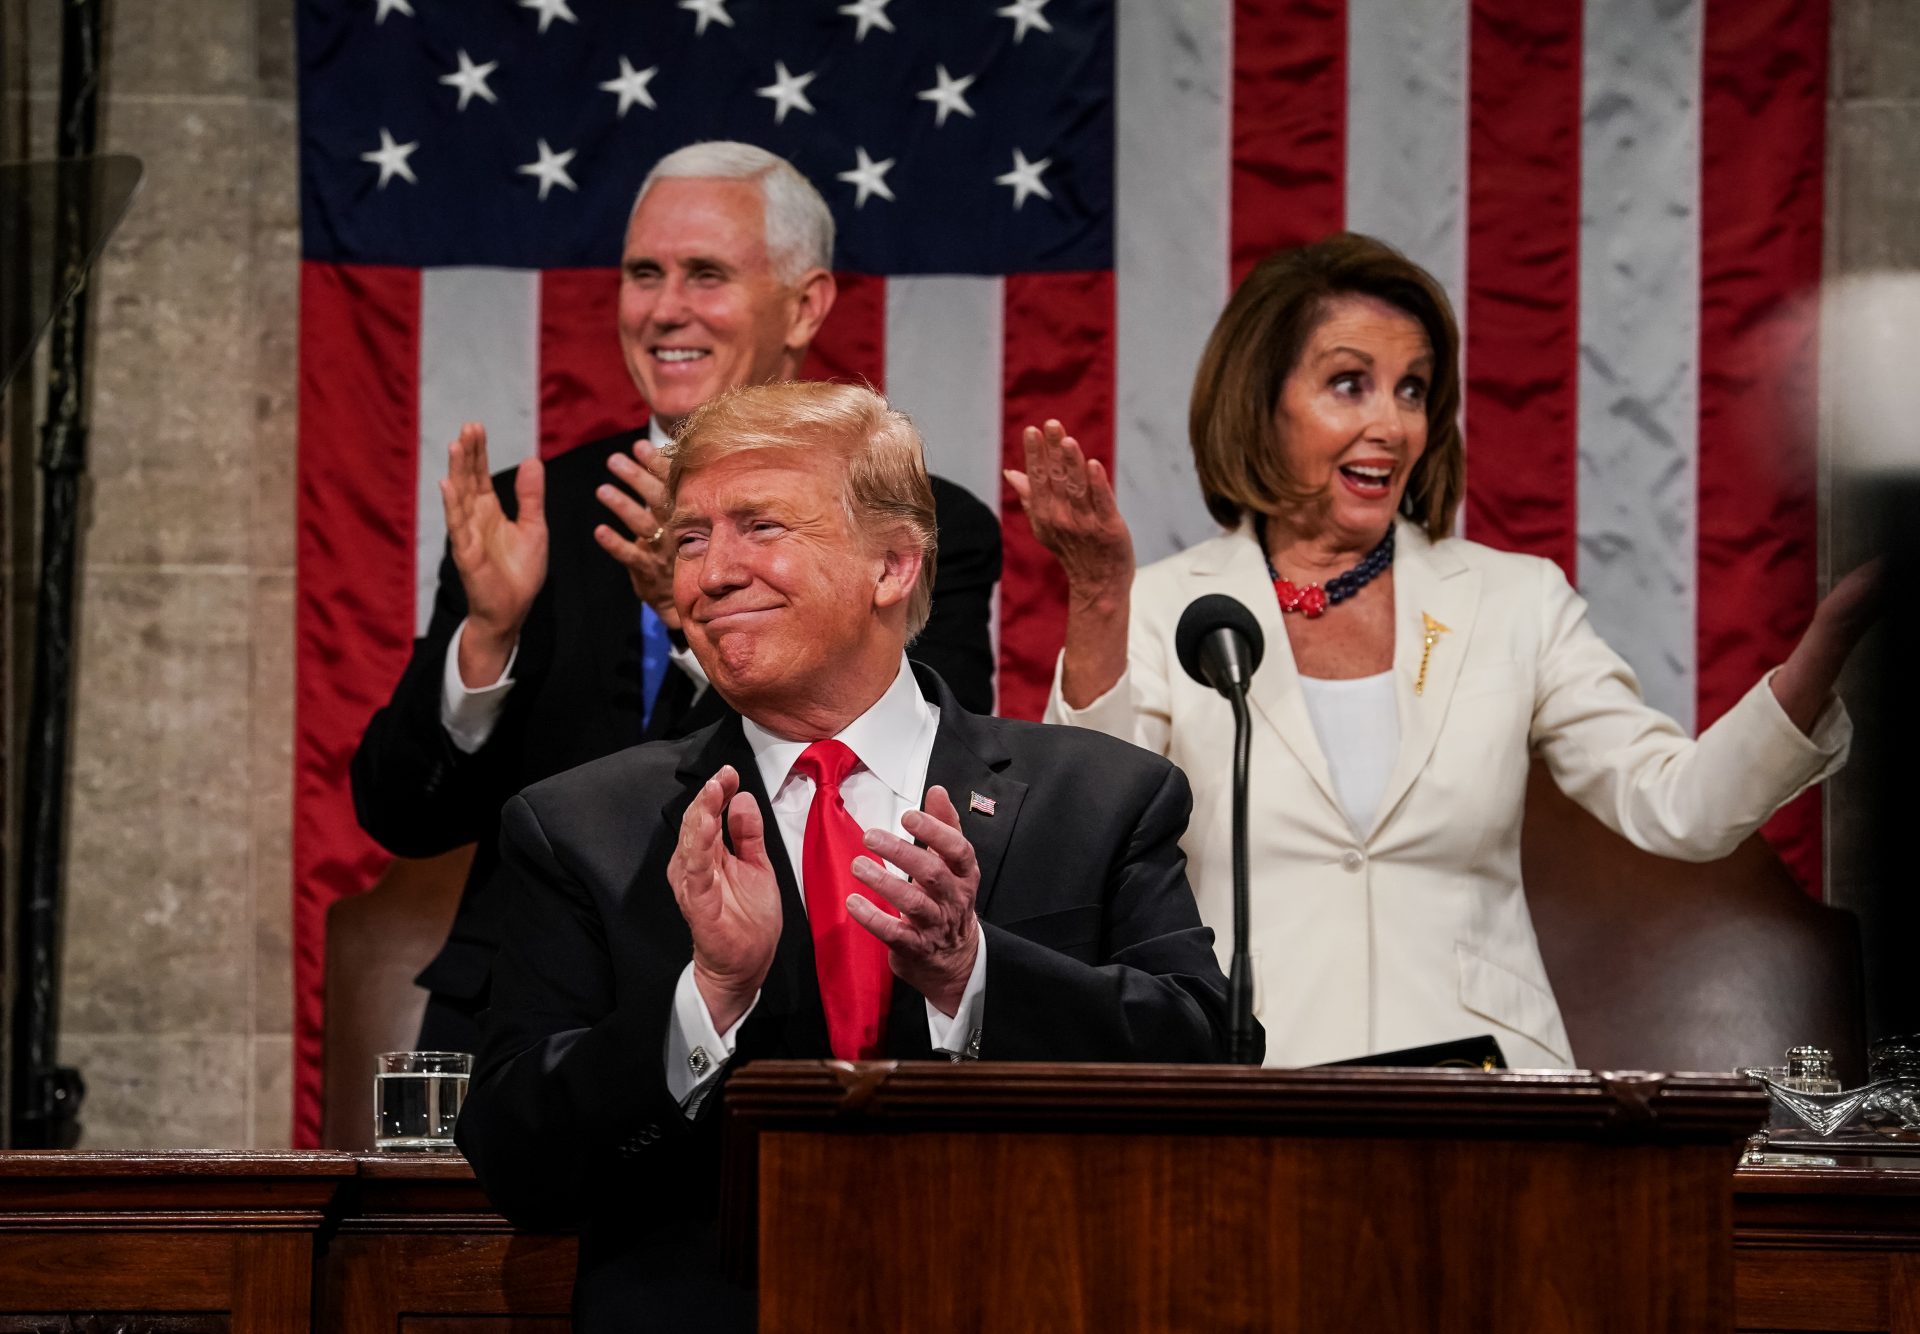 President Trump, Speaker Nancy Pelosi and Vice President Pence applaud during the State of the Union address on Feb. 5, 2019.